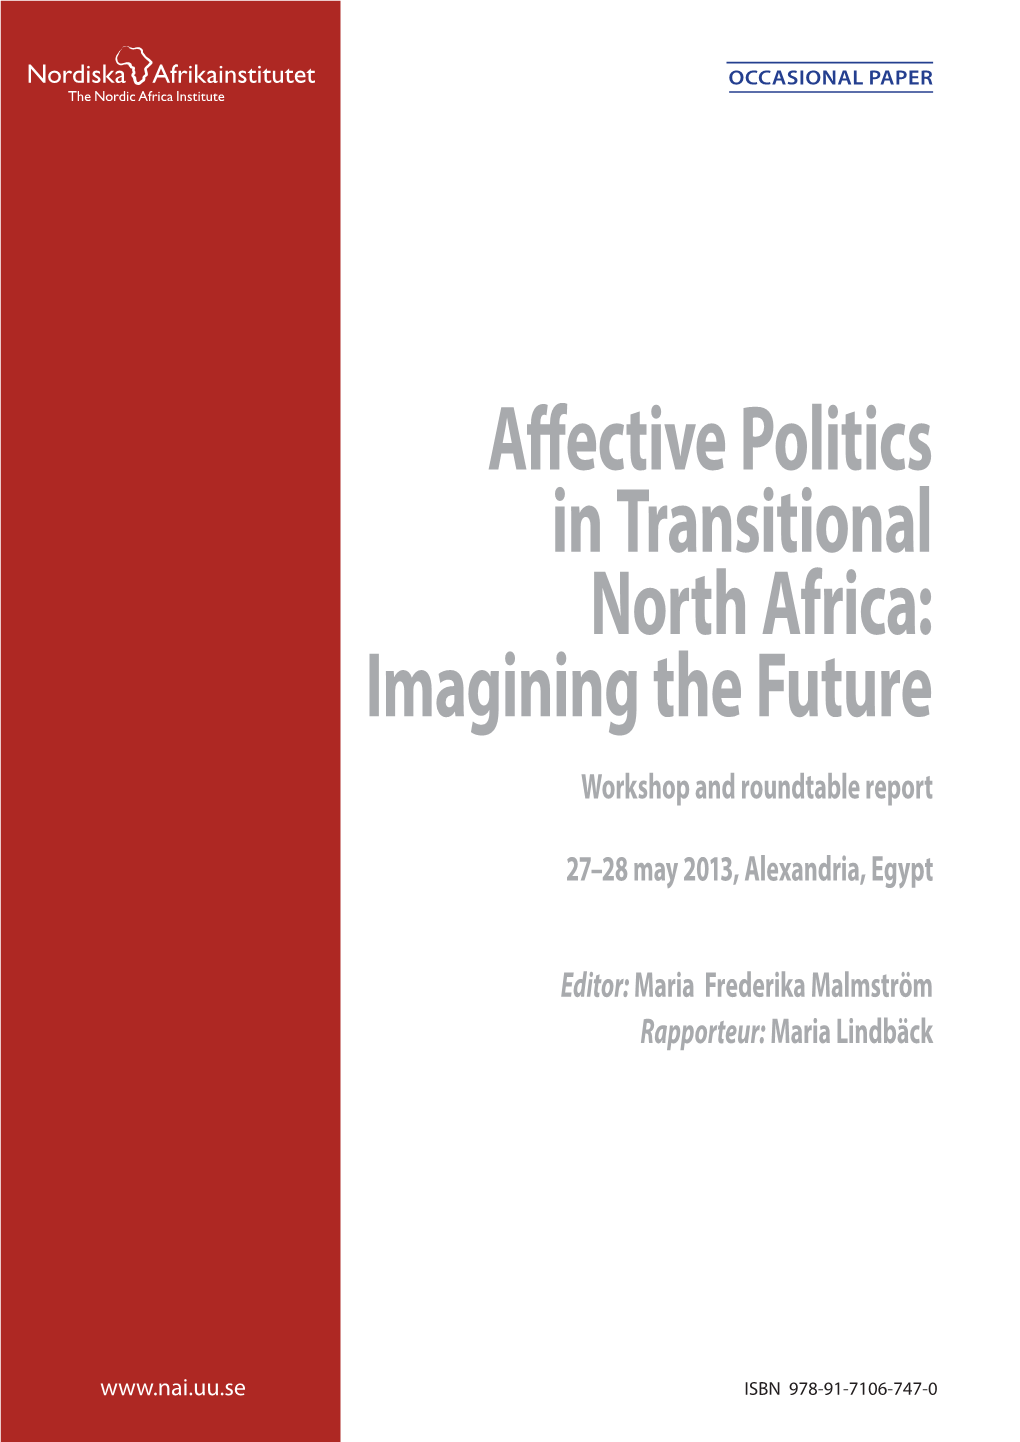 Affective Politics in Transitional North Africa: Imagining the Future Workshop and Roundtable Report